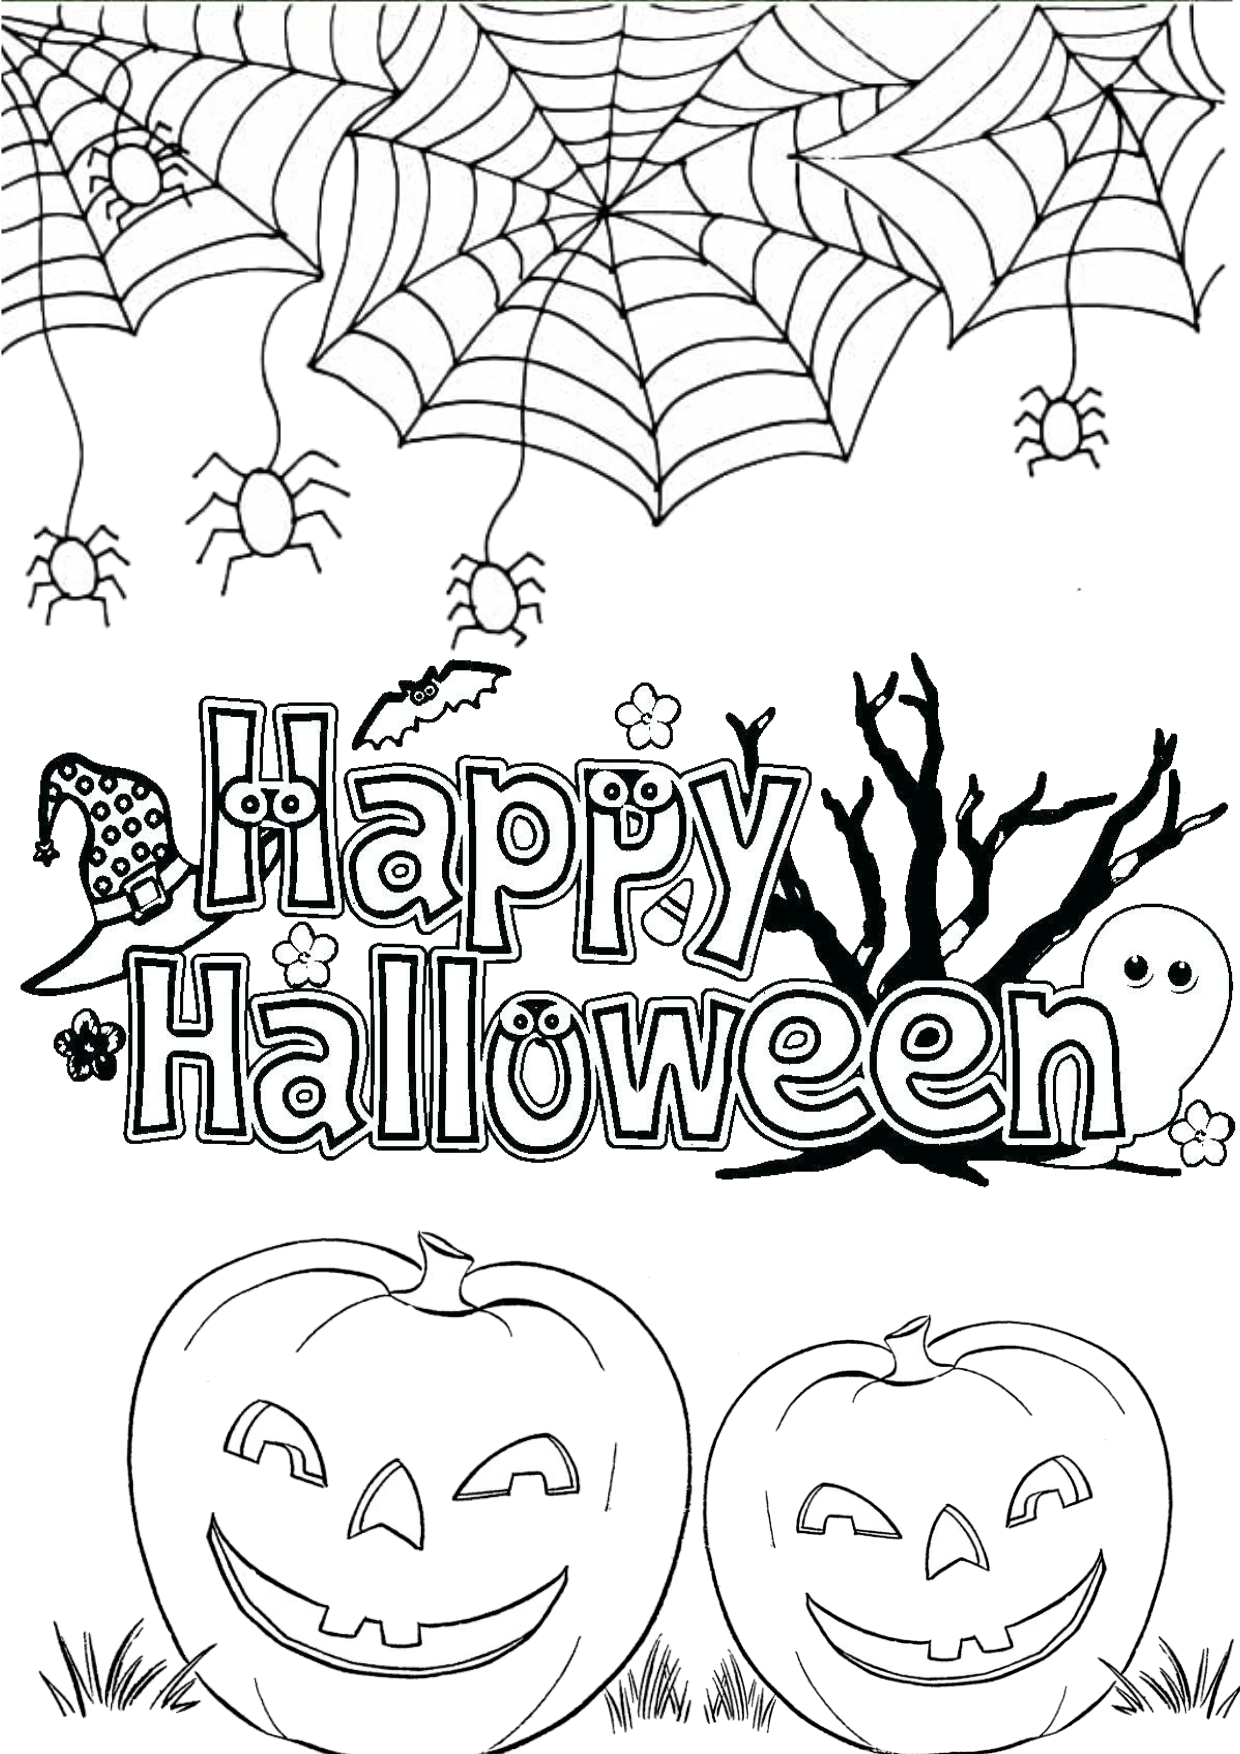 Welcome October Happy Halloween 2020 coloring page Wallpaper